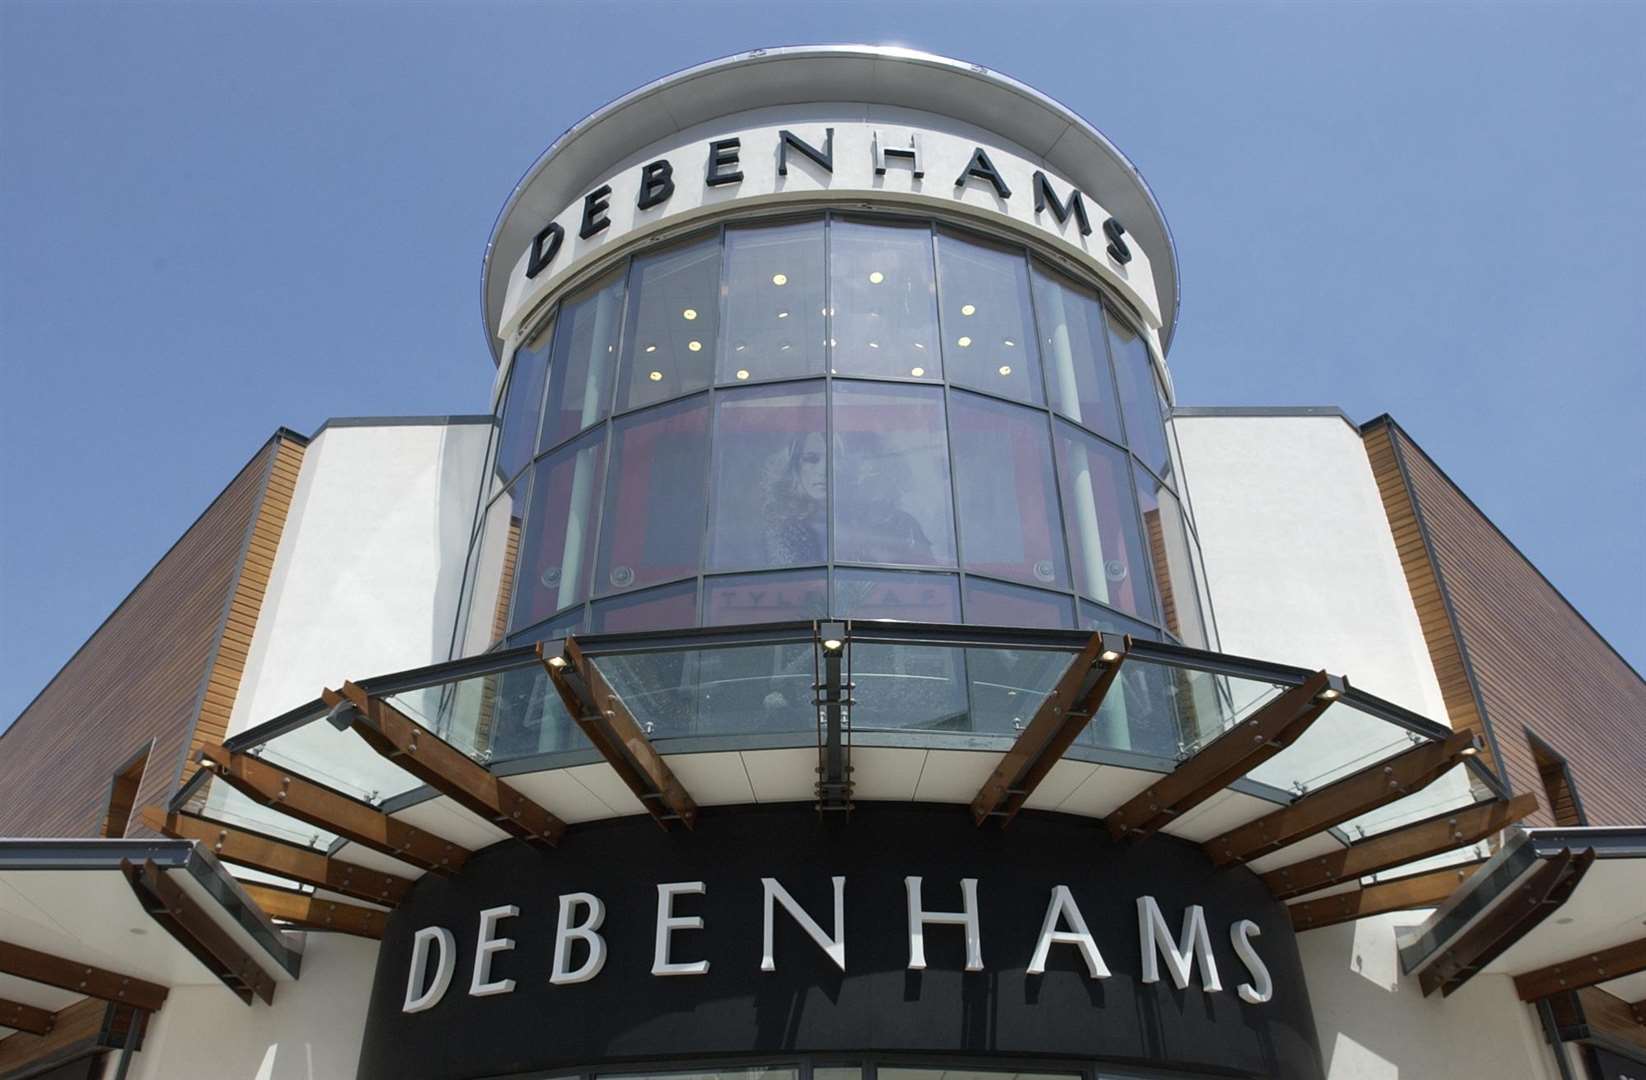 Debenhams is struggling to survive after disappointing sales in the run up to Christmas